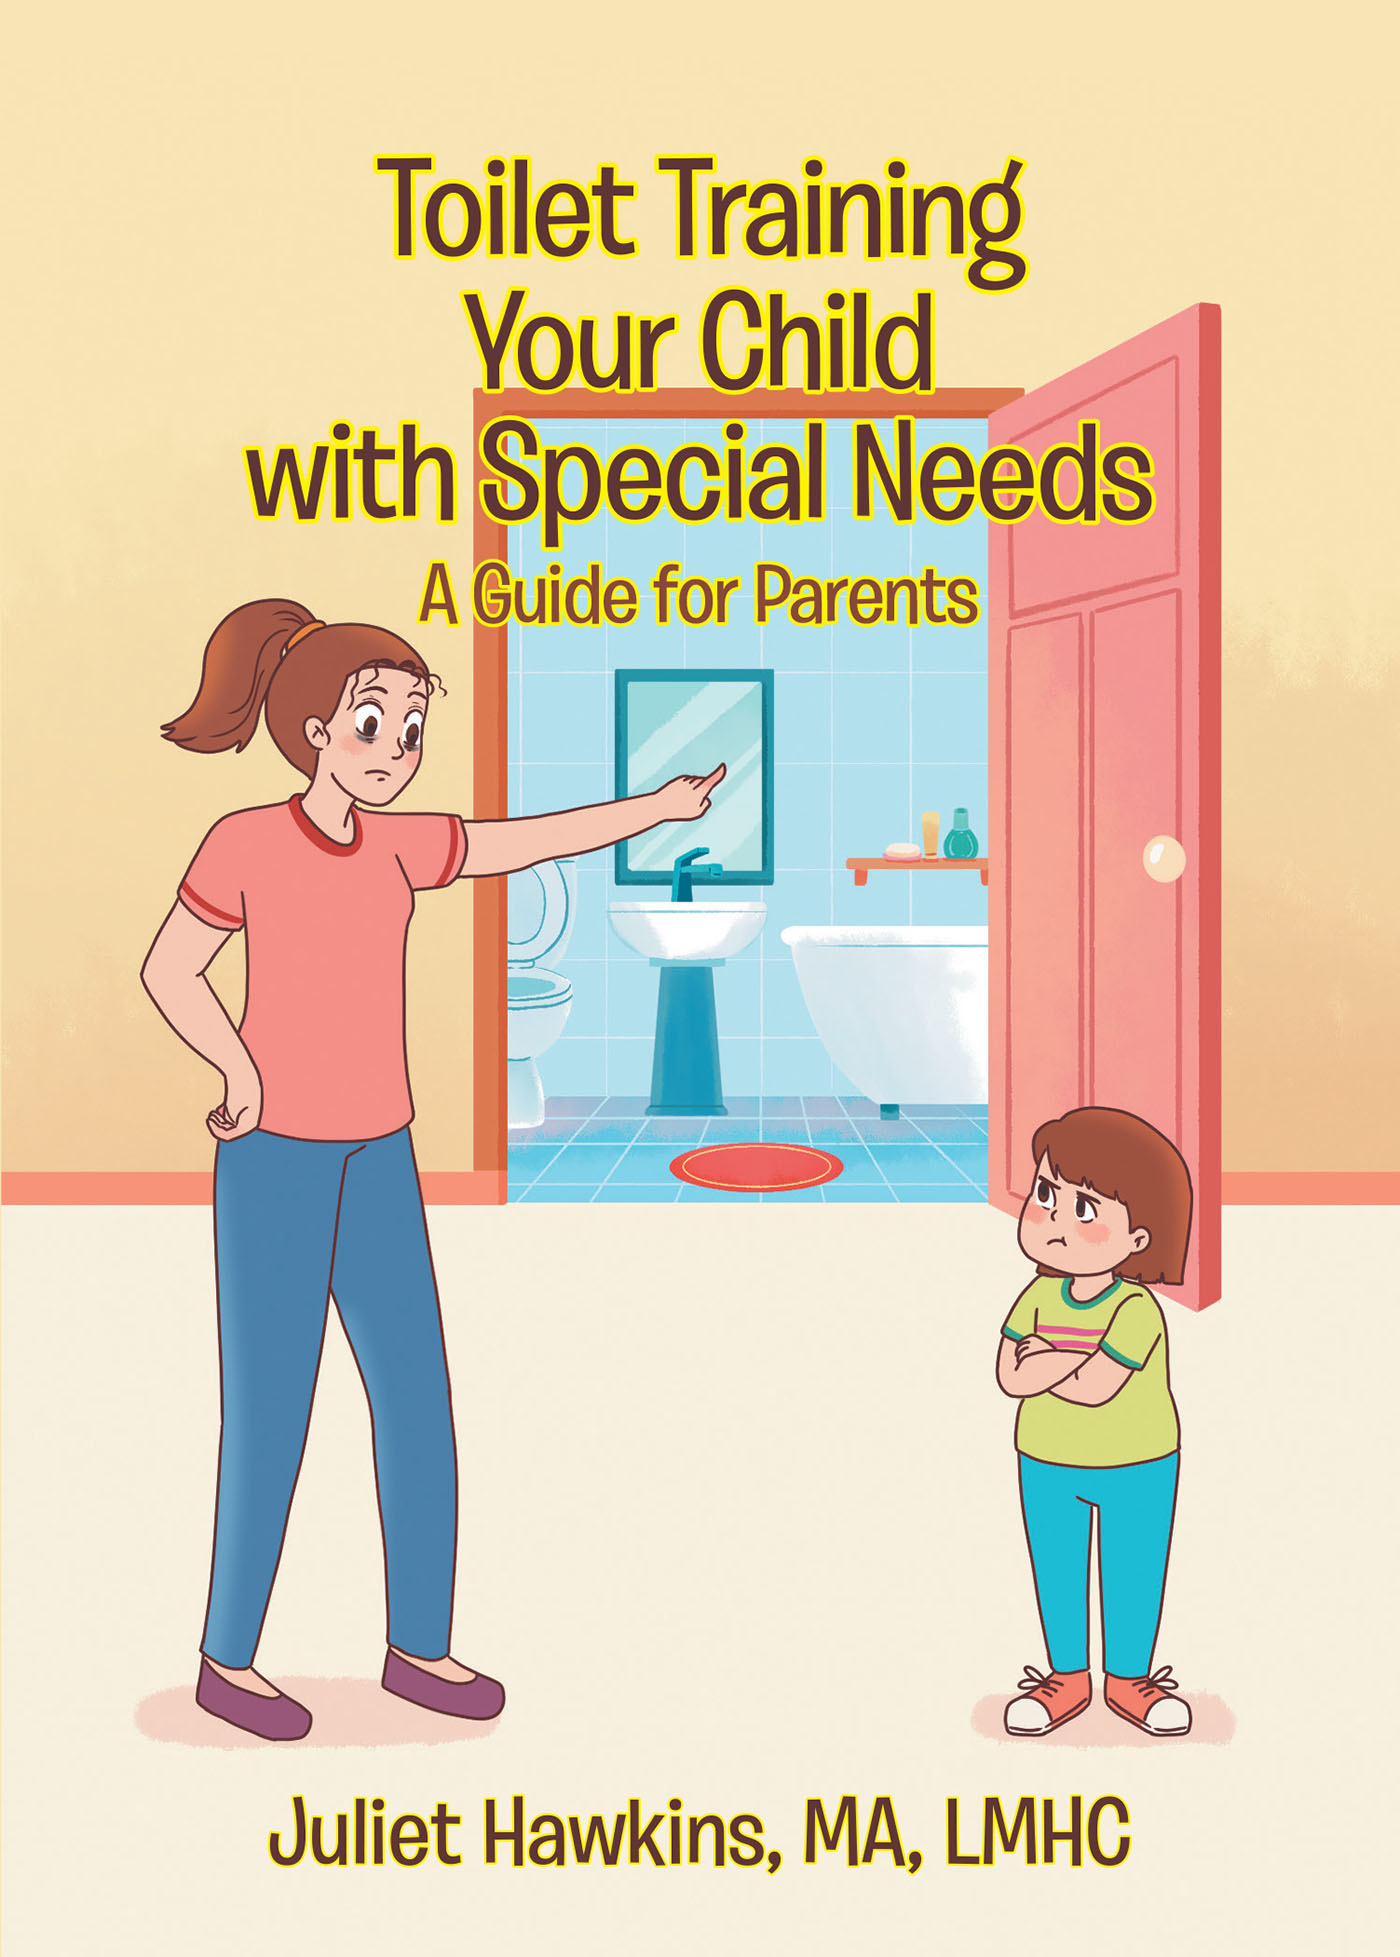 Author Juliet Hawkins’ New Book, "Toilet Training Your Child with Special Needs," Explores How to Change a Daunting Task in Child Rearing Into a Manageable Task